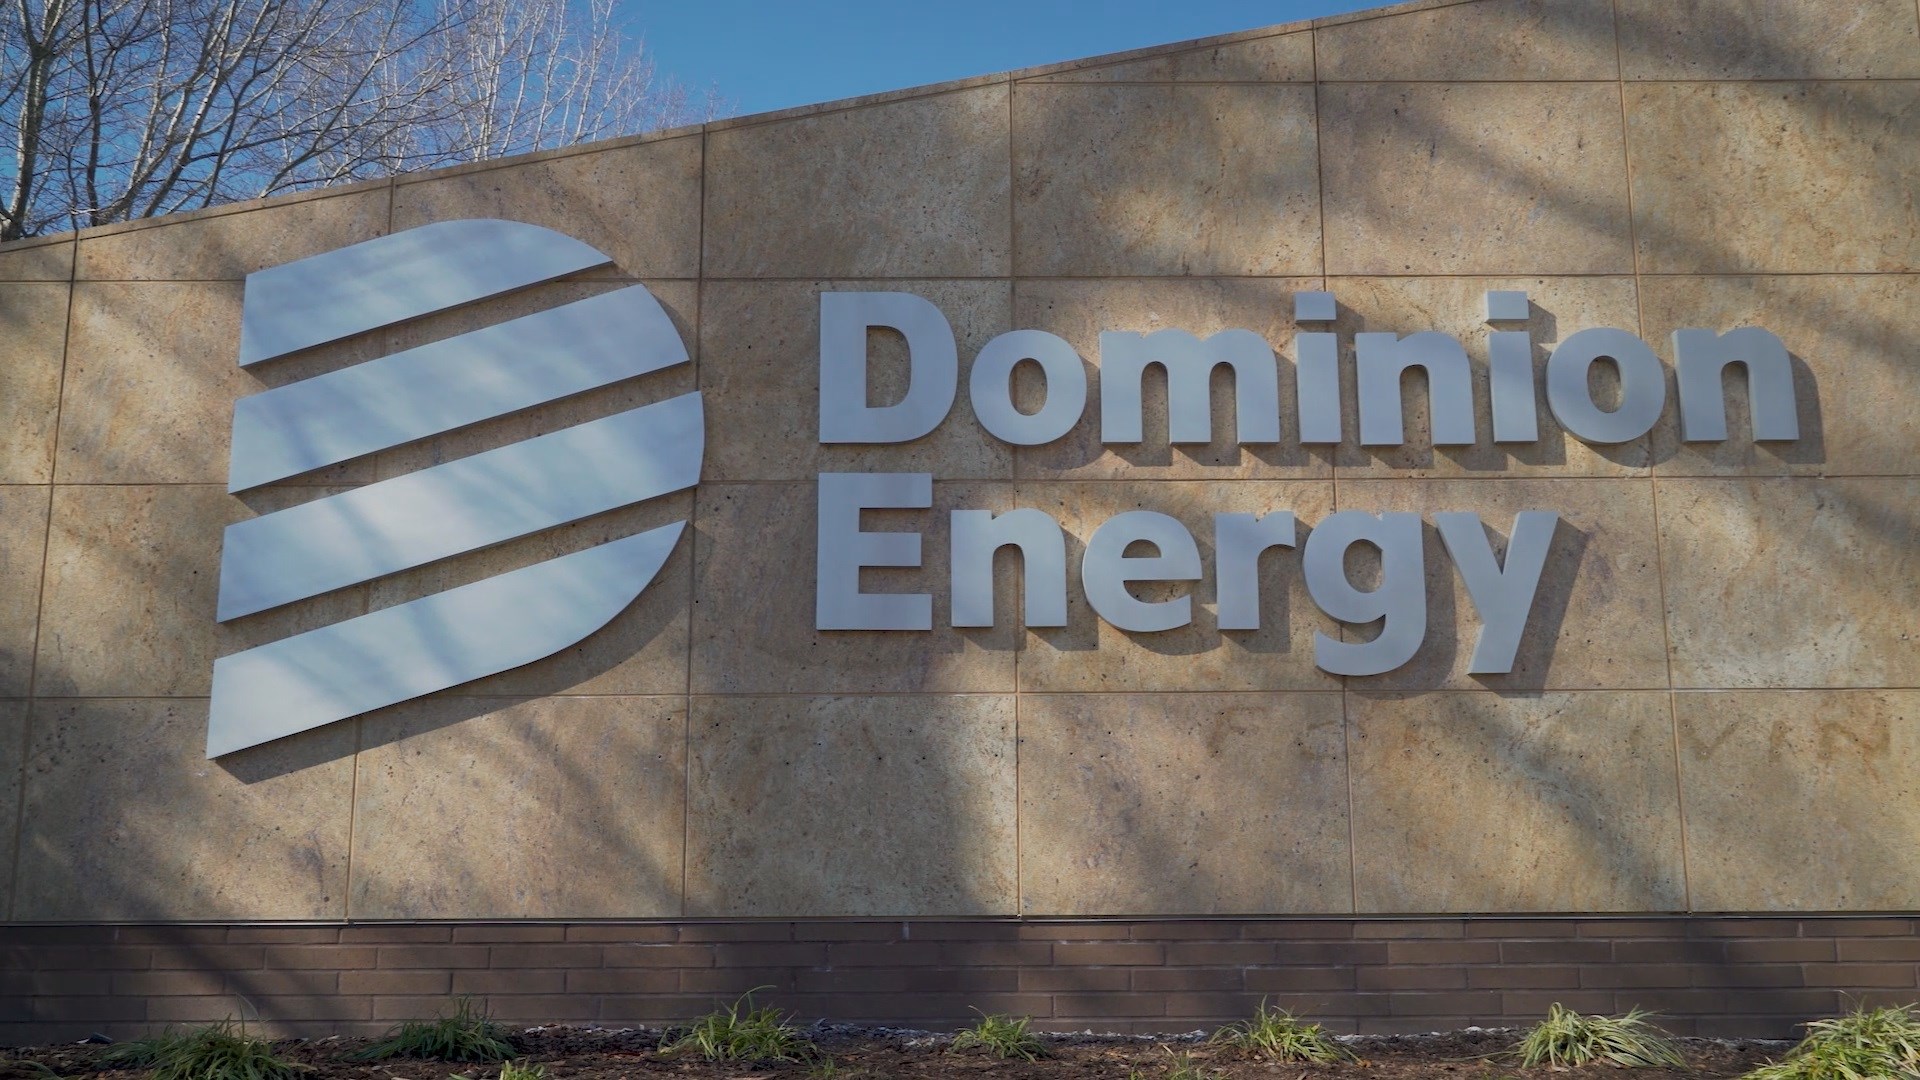 Dominion Energy asks South Carolinians to conserve energy amid strong winter weather